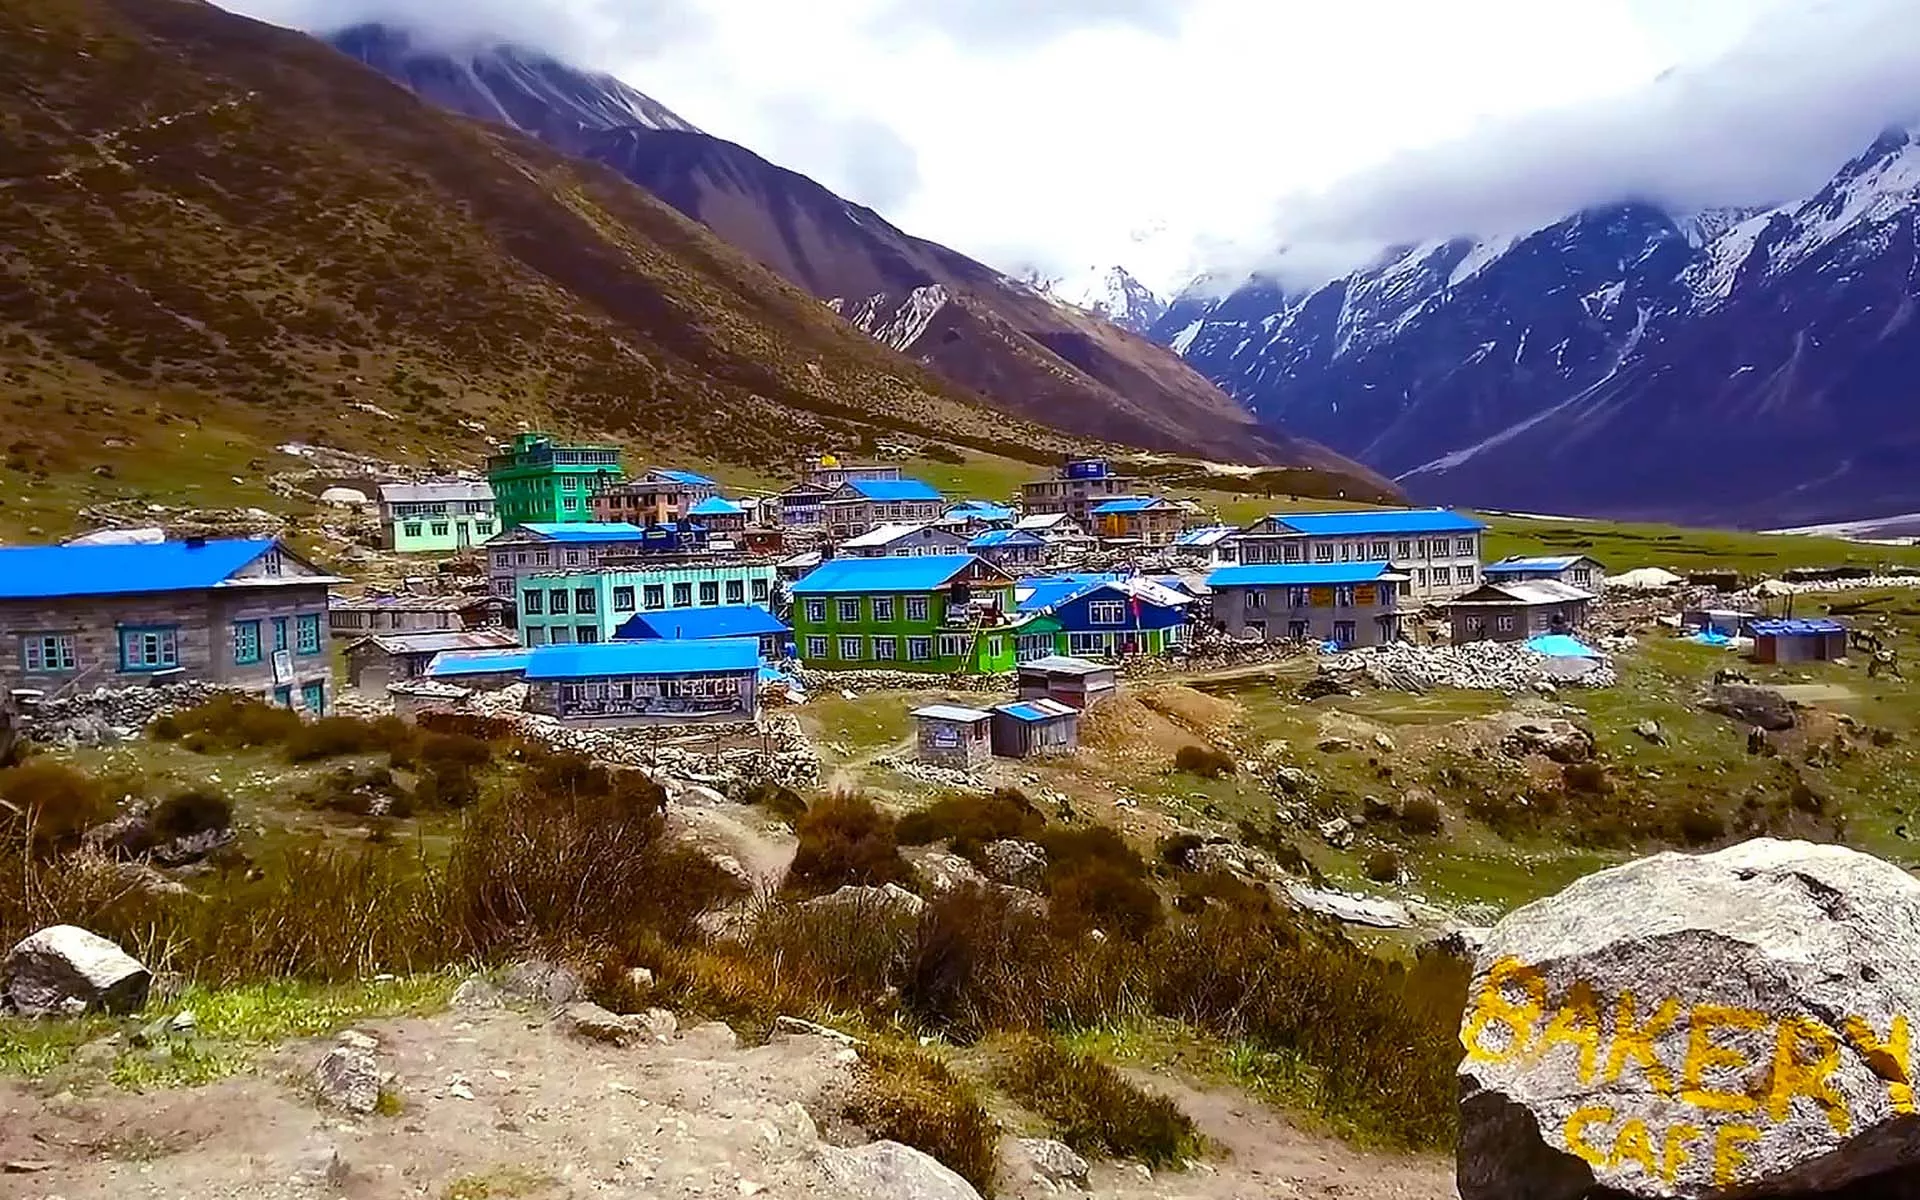 Langtang Valley and Tamang Heritage Trek in Nepal, Central Asia | Trekking & Hiking - Rated 0.8